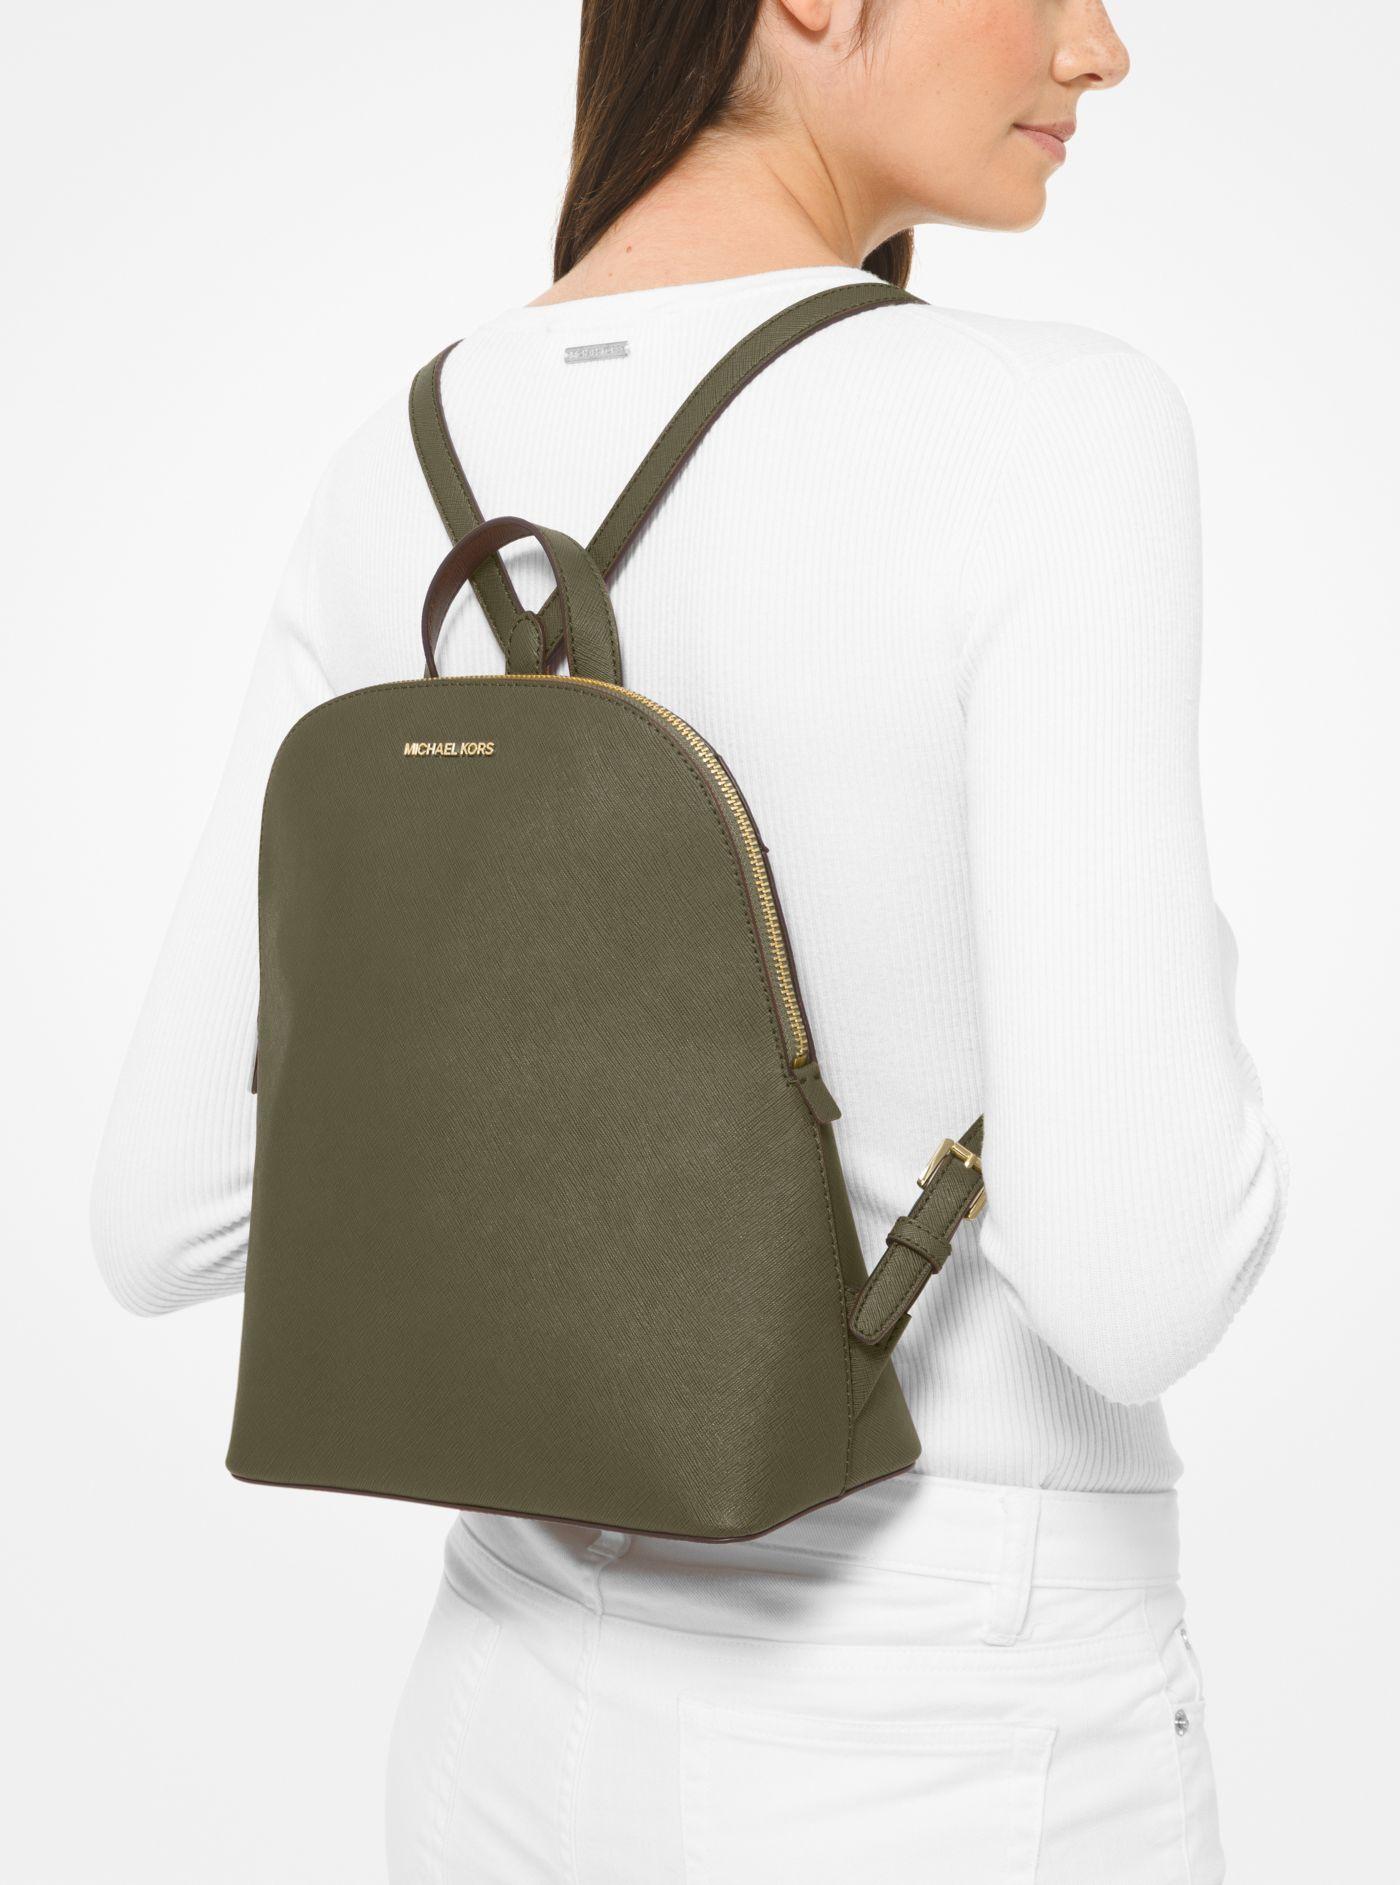 Michael Kors Cindy Large Saffiano Leather Backpack in Green | Lyst